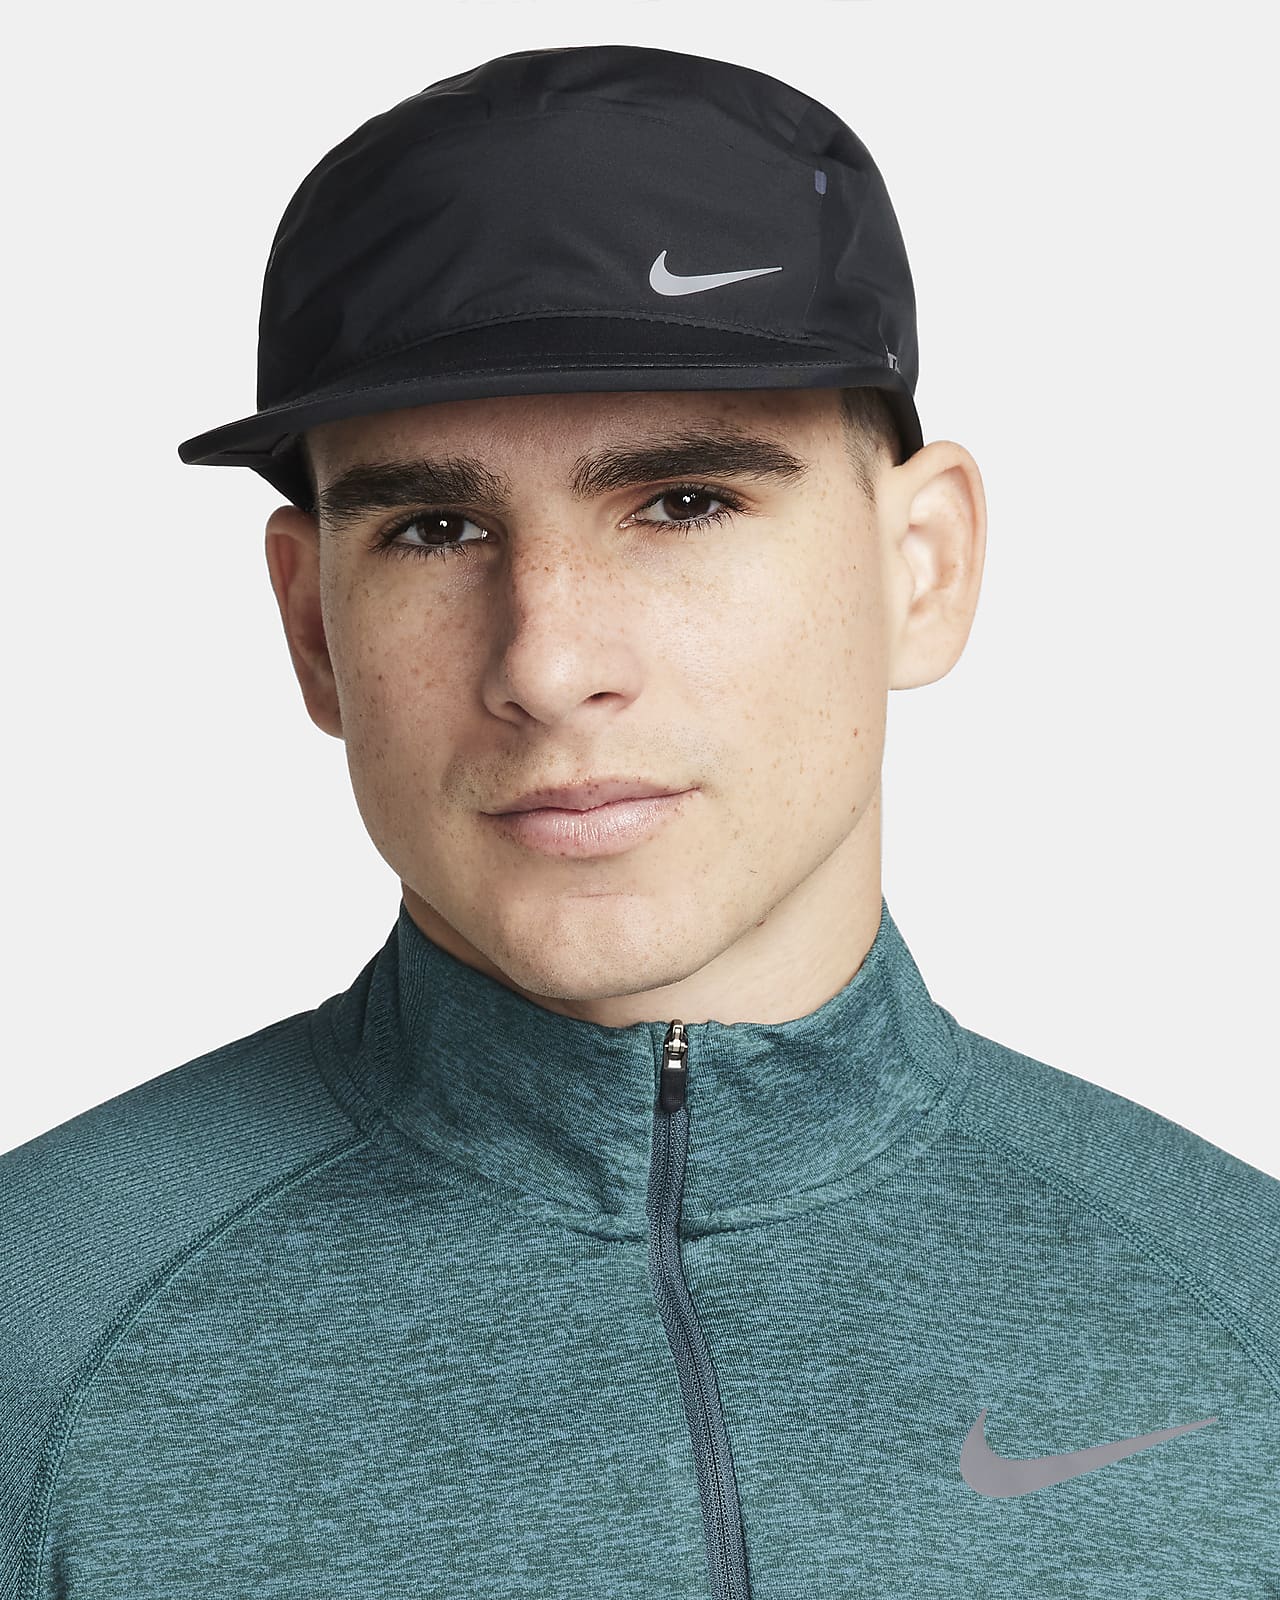 Storm-FIT Unstructured ADV Nike AeroBill Cap. Fly